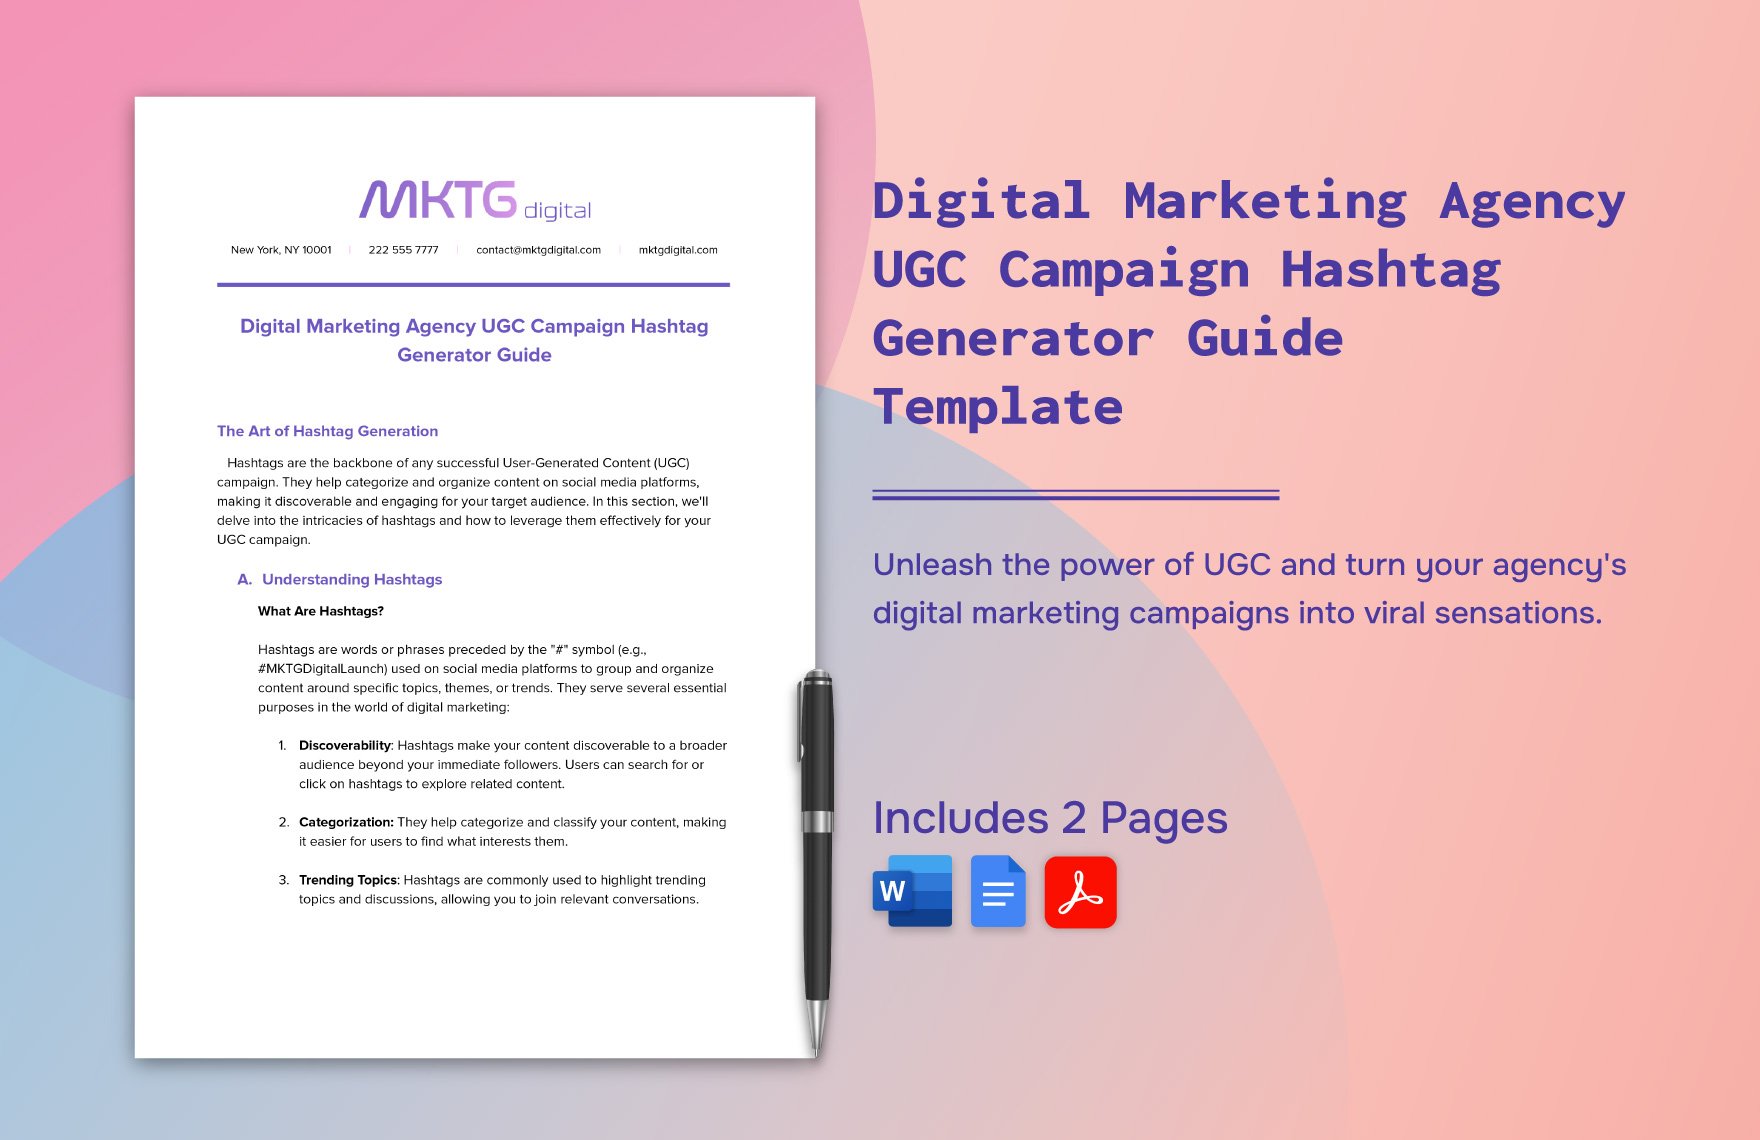 Digital Marketing Agency UGC Campaign Hashtag Generator Guide Template